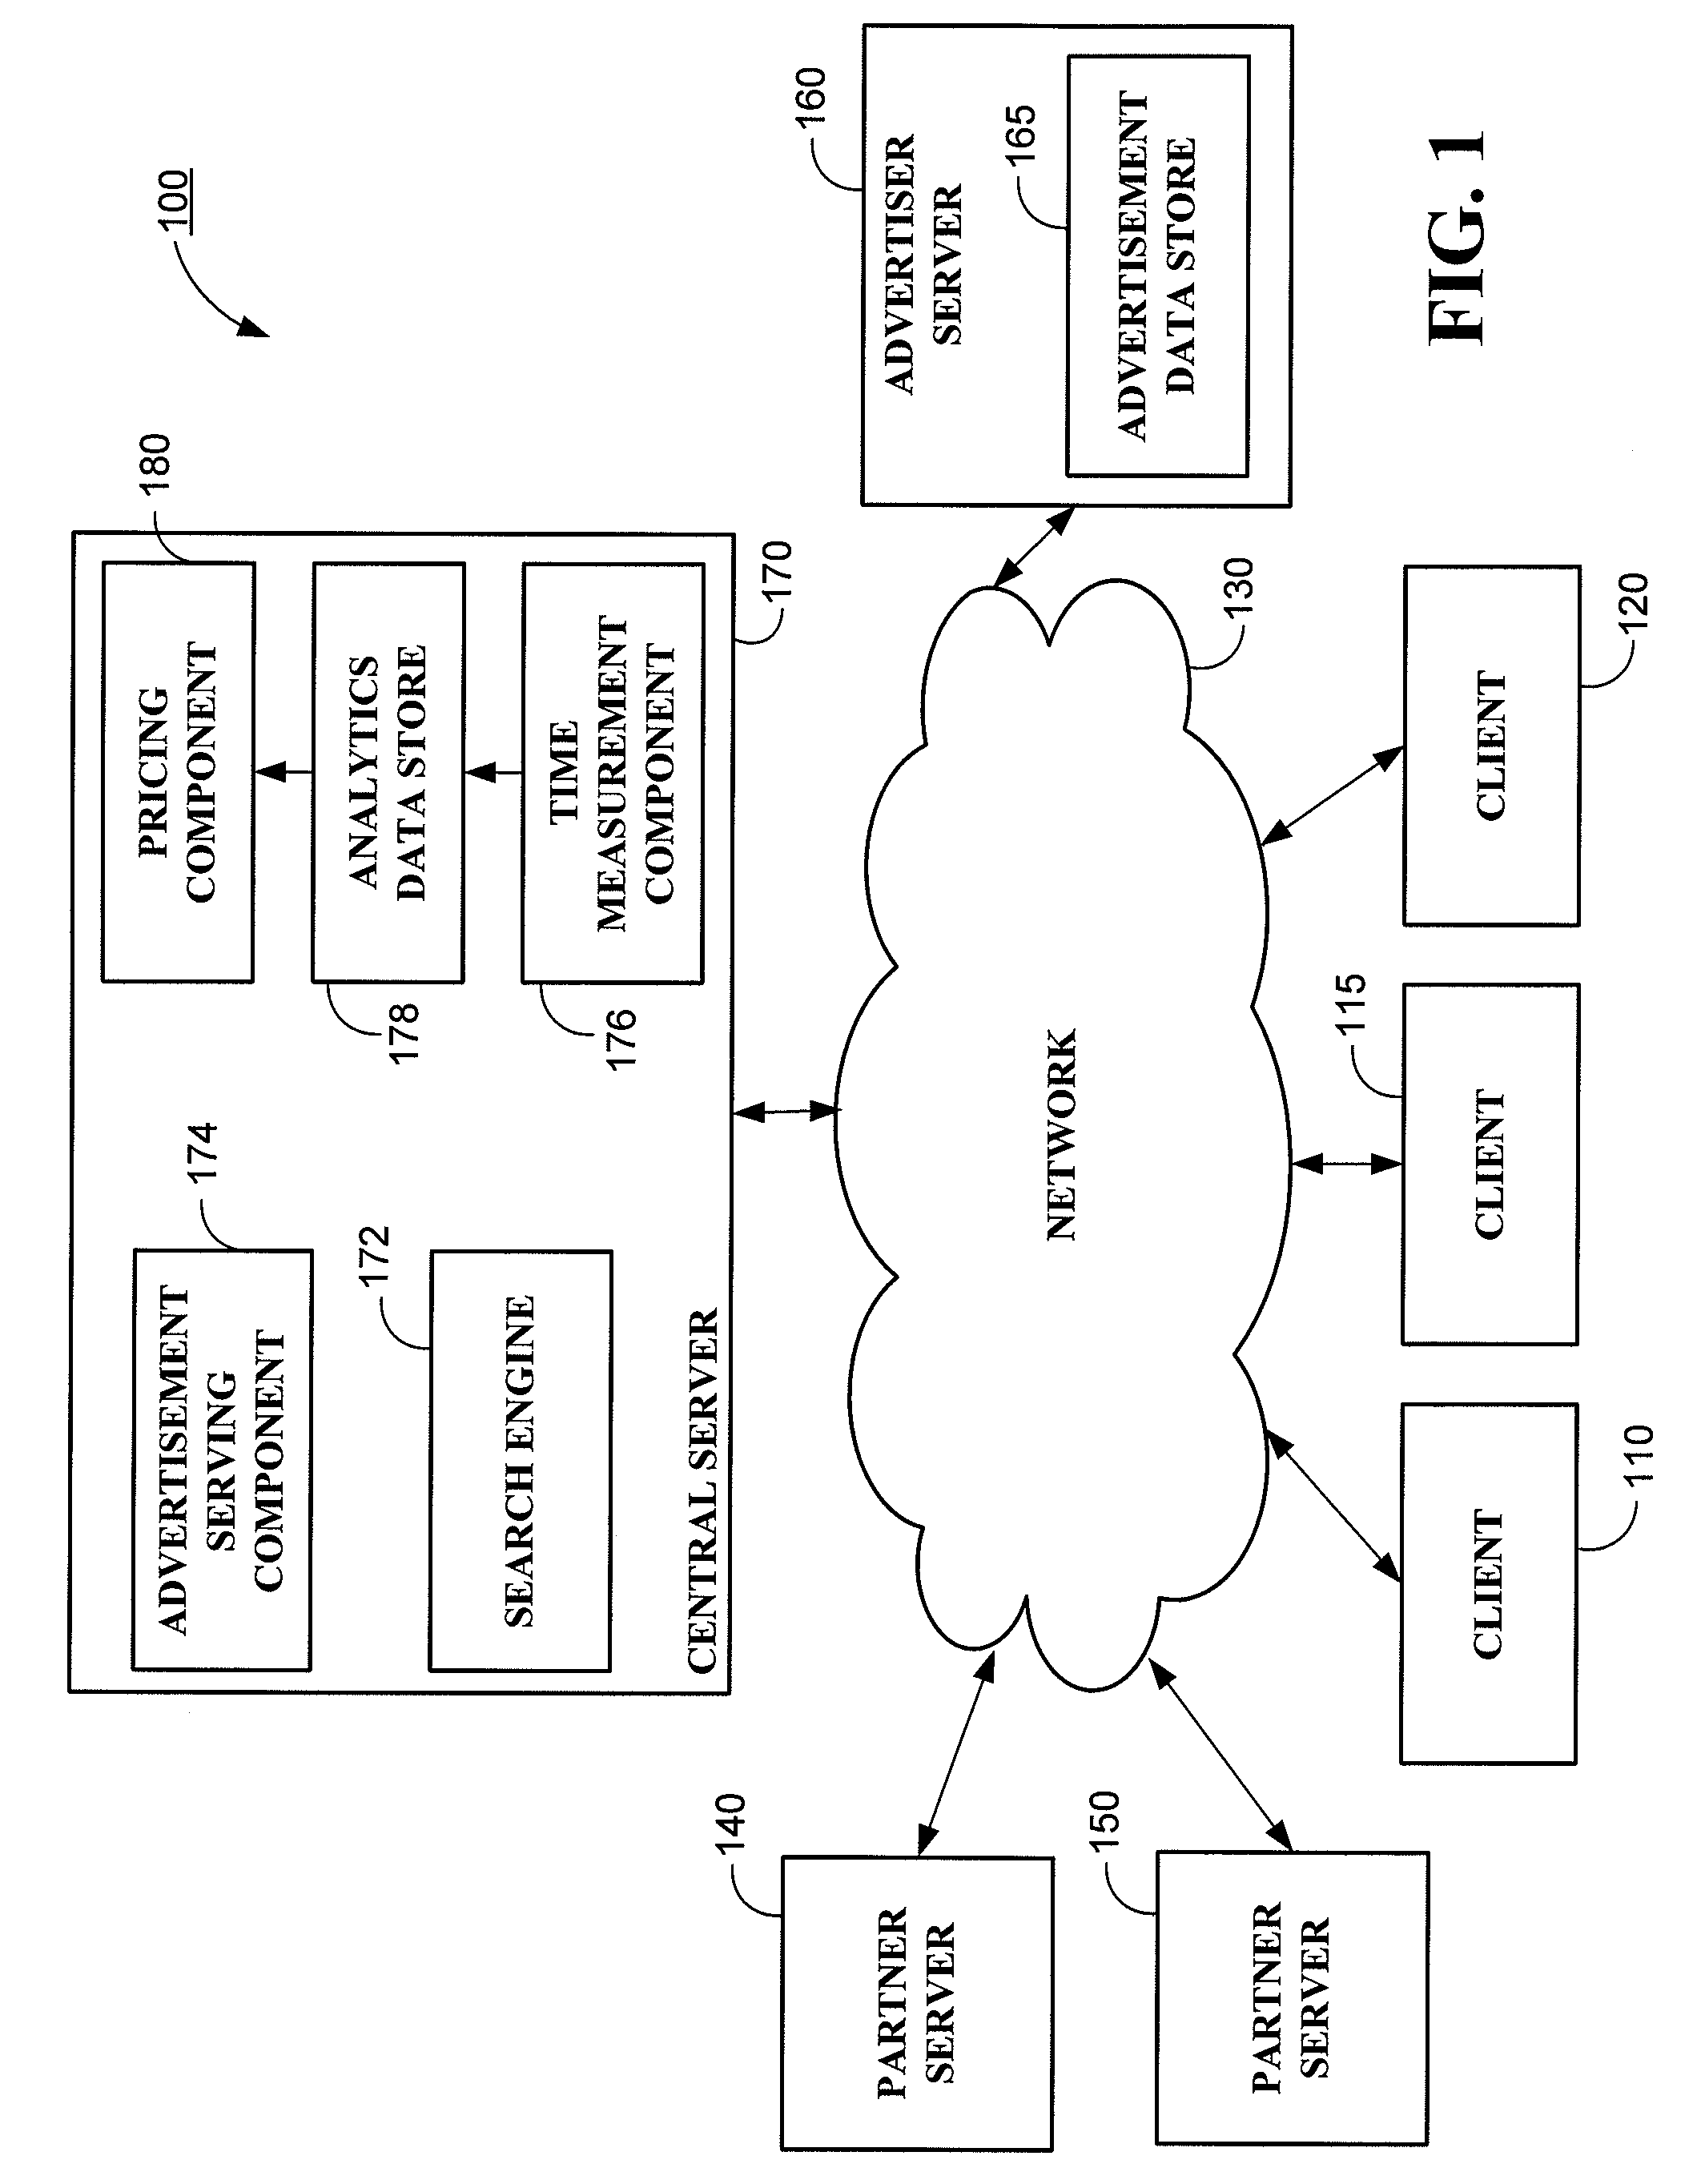 System and method for utilizing time measurements in advertising pricing